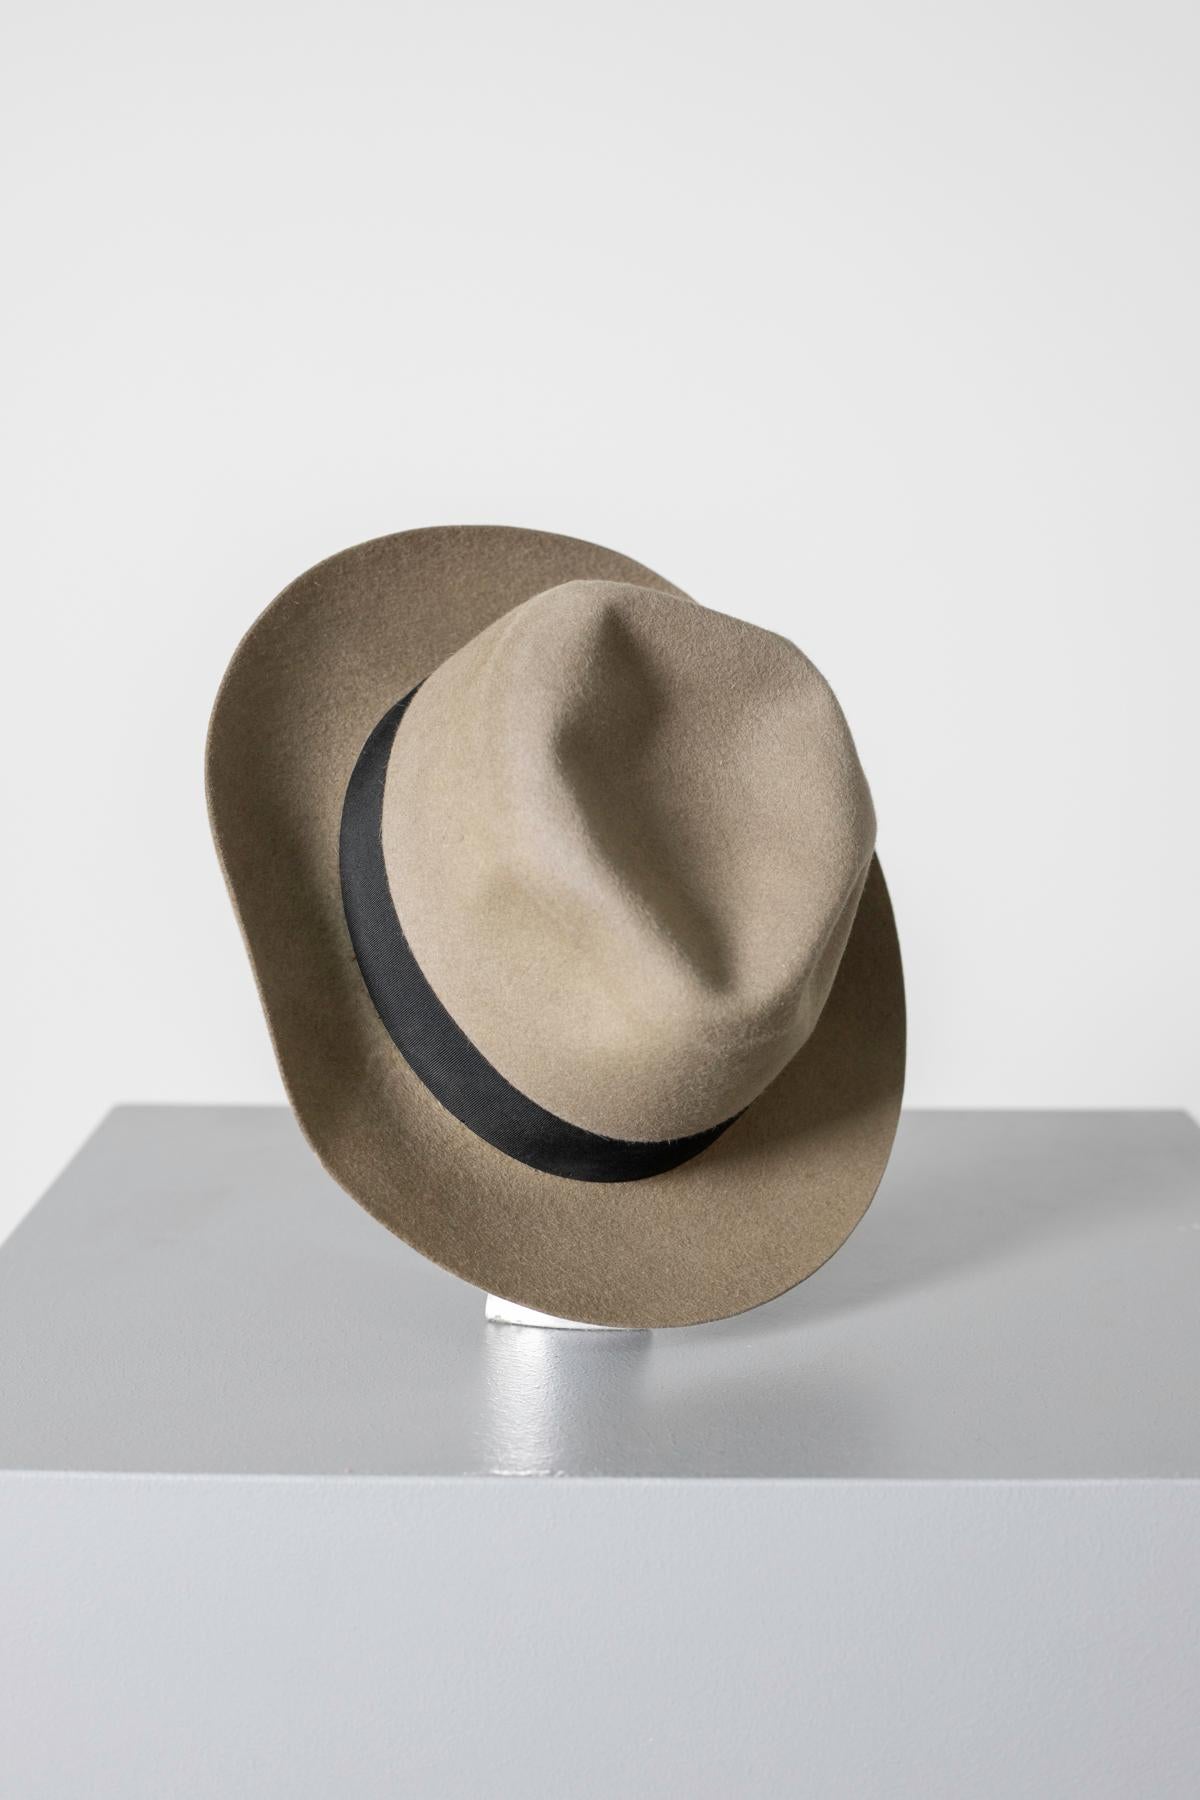 Nice beige felt hat from the 1990s vintage, fine Italian manufacture.
The hat is made entirely of felt
The dome bears 4 soft pinches.
At the outer base of the dome is a black band with a minimal bow on the left.
On the inside of the dome the hat is